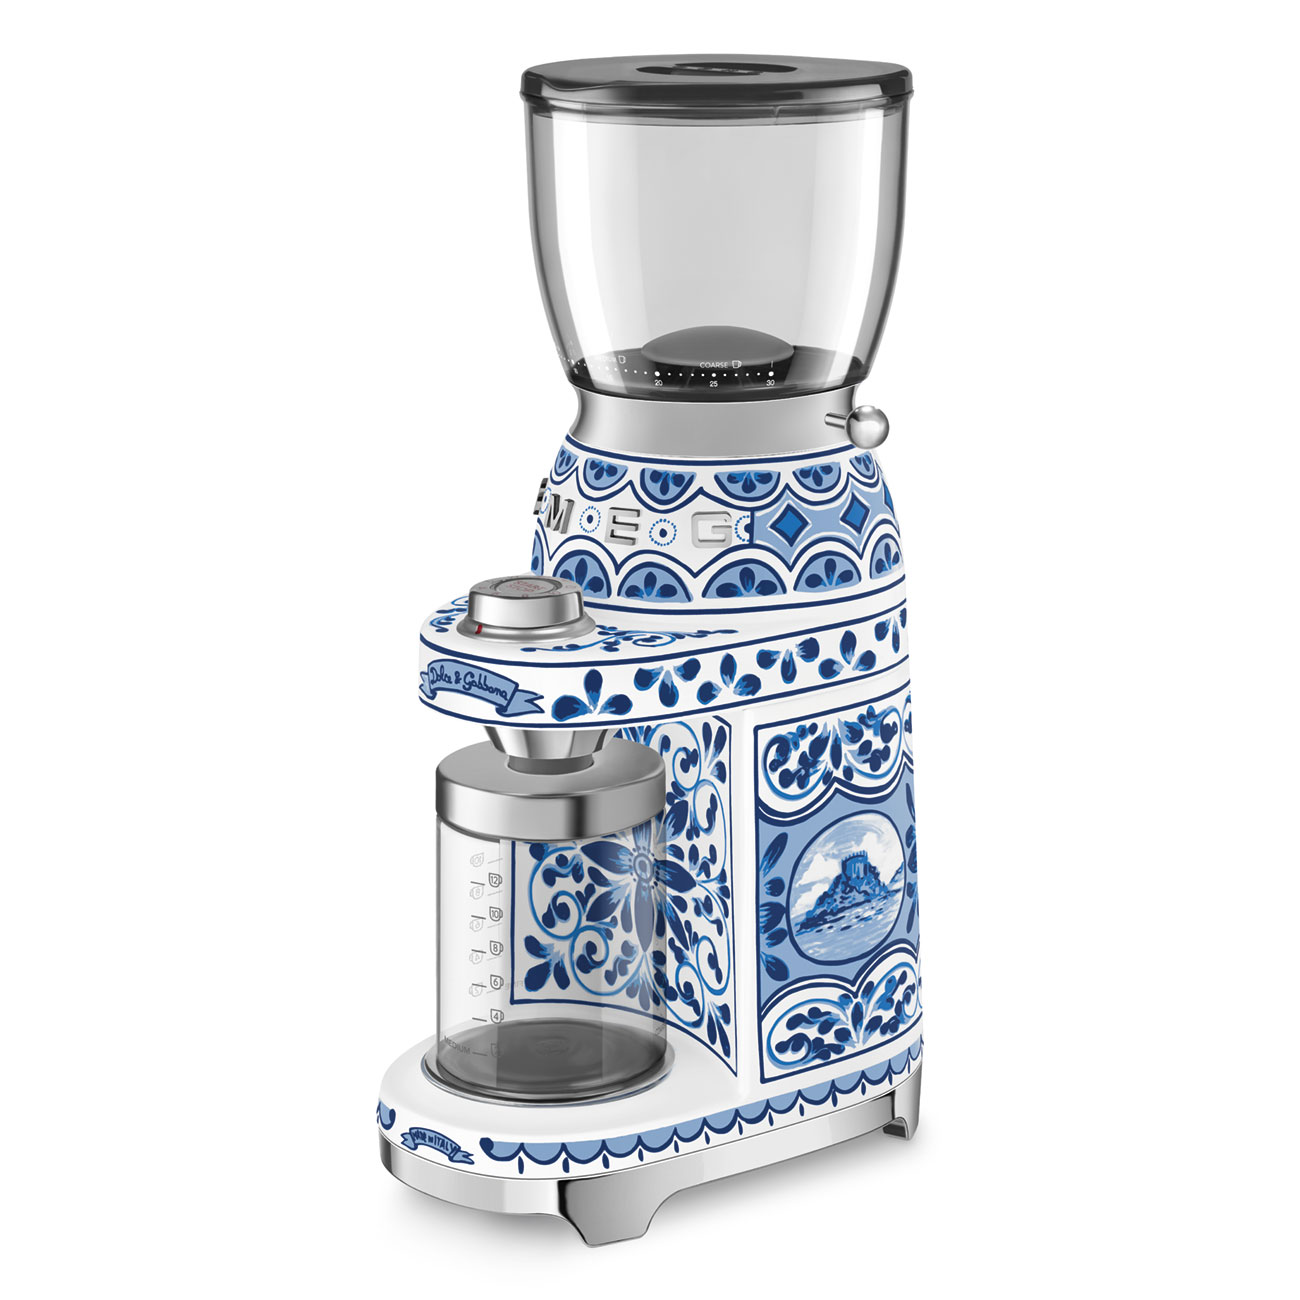 Decorated / Special Coffee Grinder featuring a conical burr - CGF01DGBUK - Smeg_5